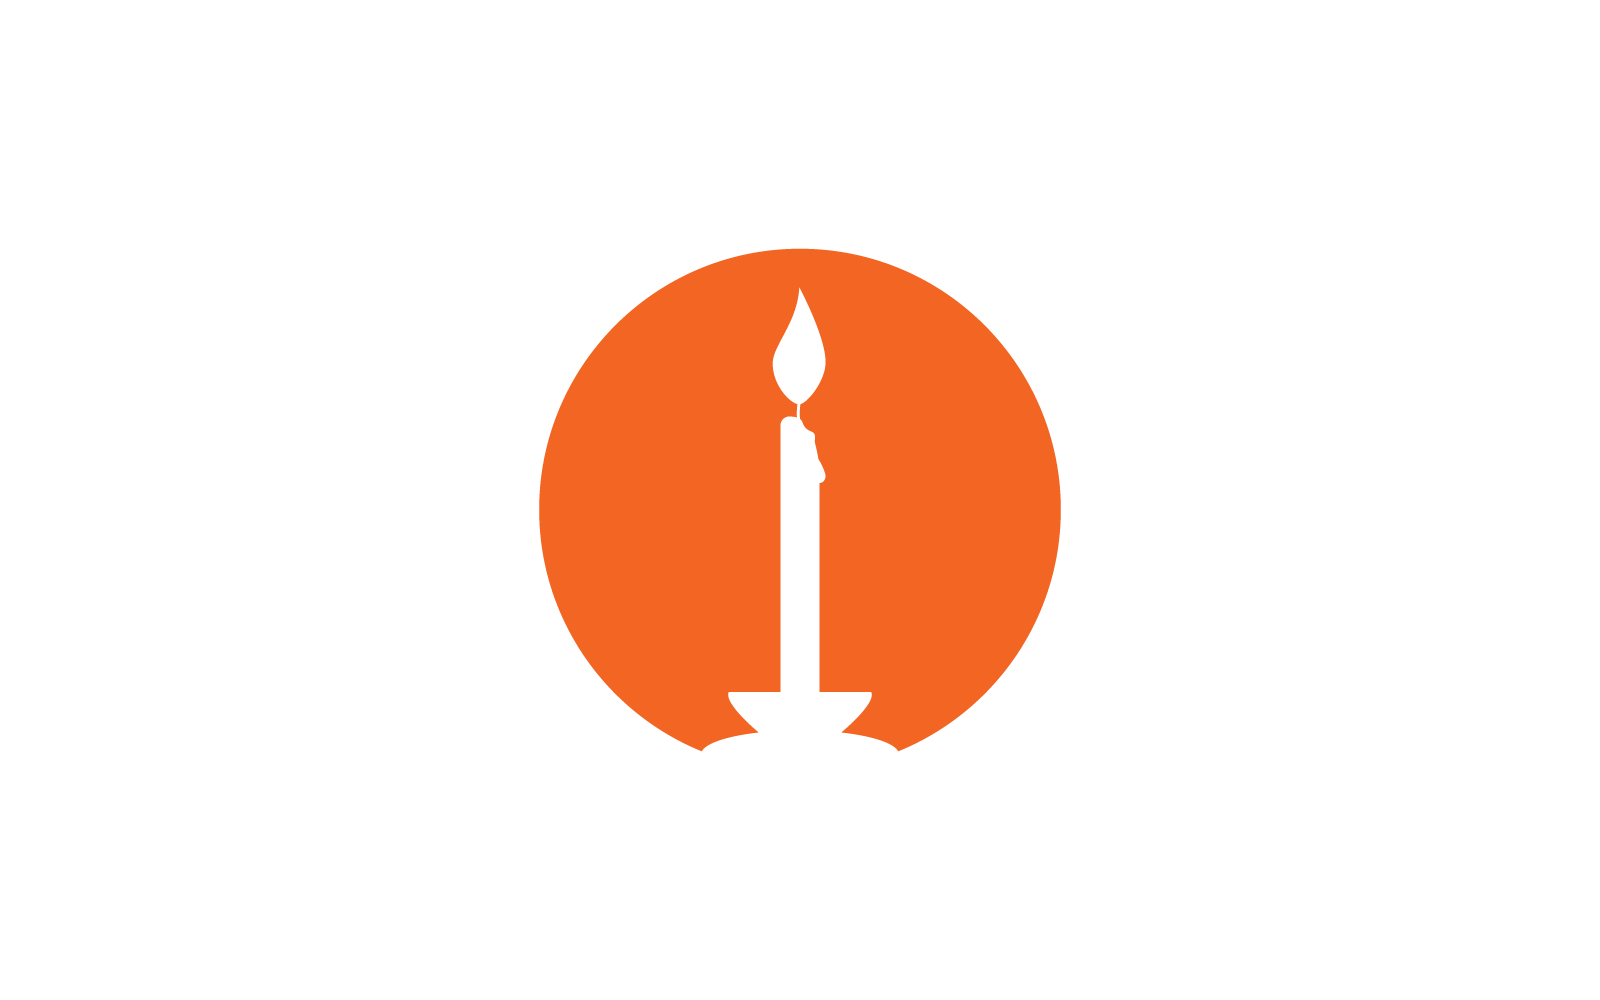 Candlelight dinner icon design vector